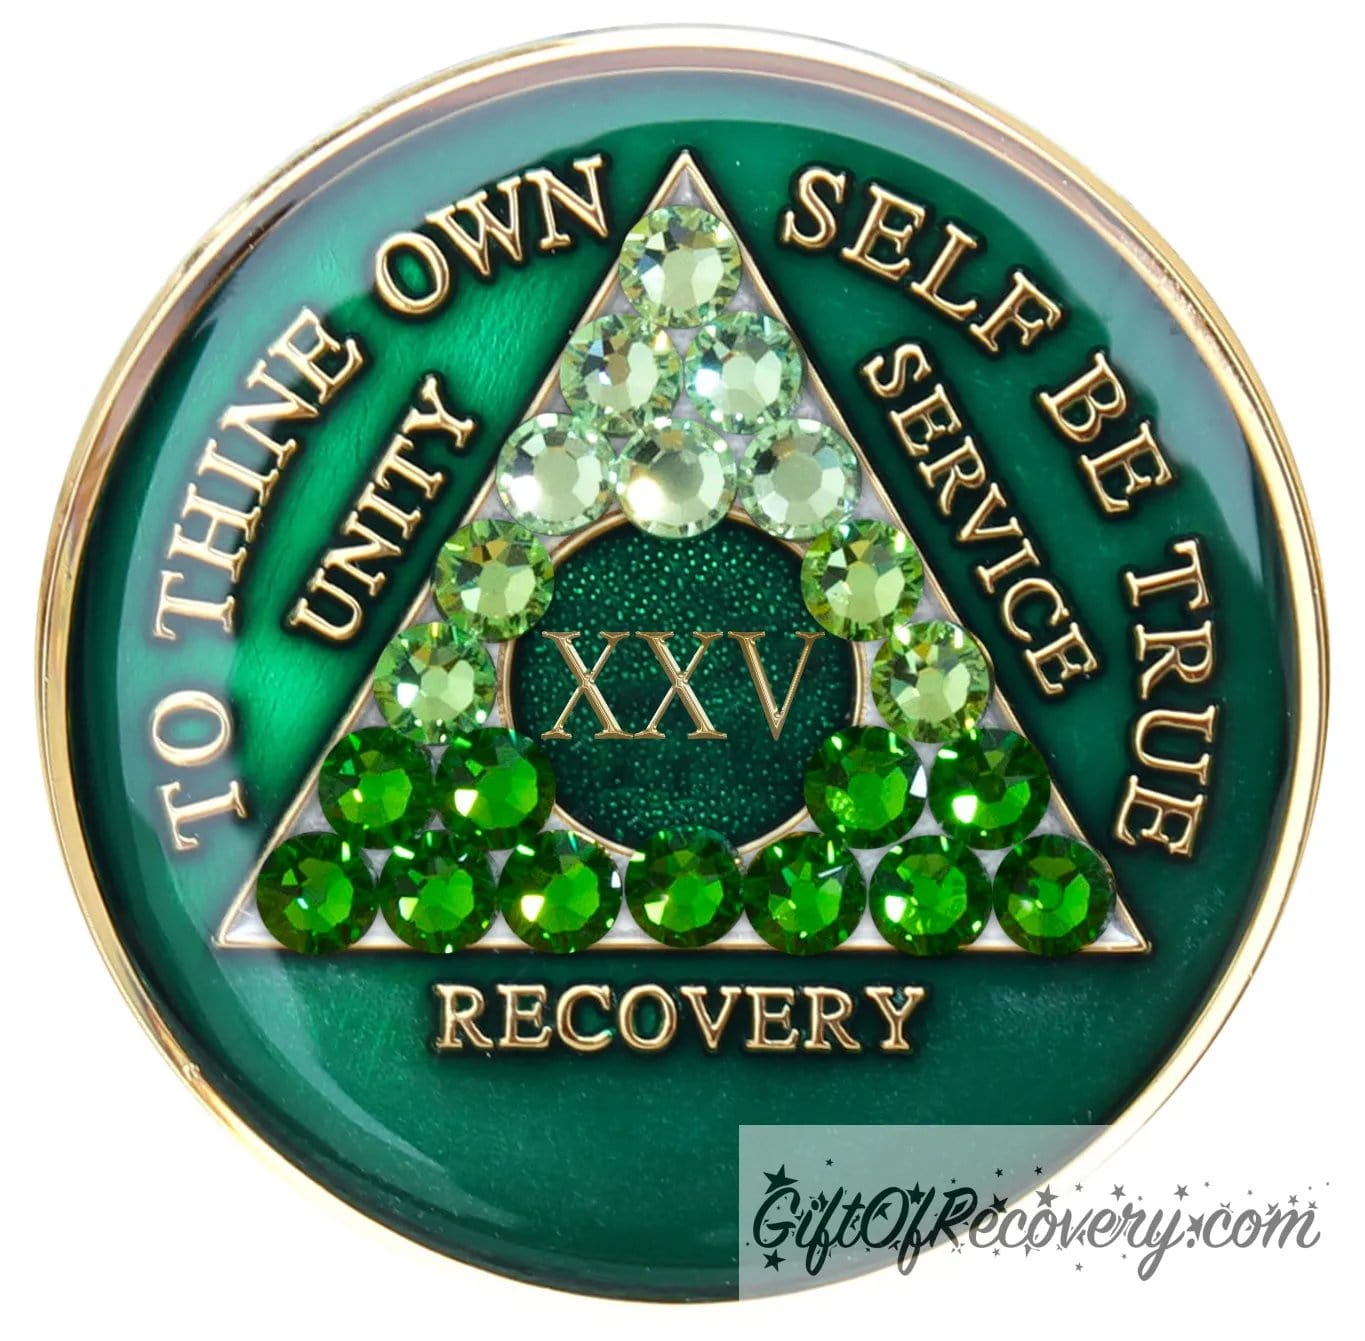 25 year AA medallion, emerald green with 21 genuine green crystals ranging from light to dark green in the shape of the triangle in the center to emphasize the transformation in the recovery journey, to thine own self be true, roman number, unity, service recovery are embossed in 14k gold-plated brass, the middle circle is sparkle green and the recovery medallion is sealed in resin for a shiny finish that lasts.